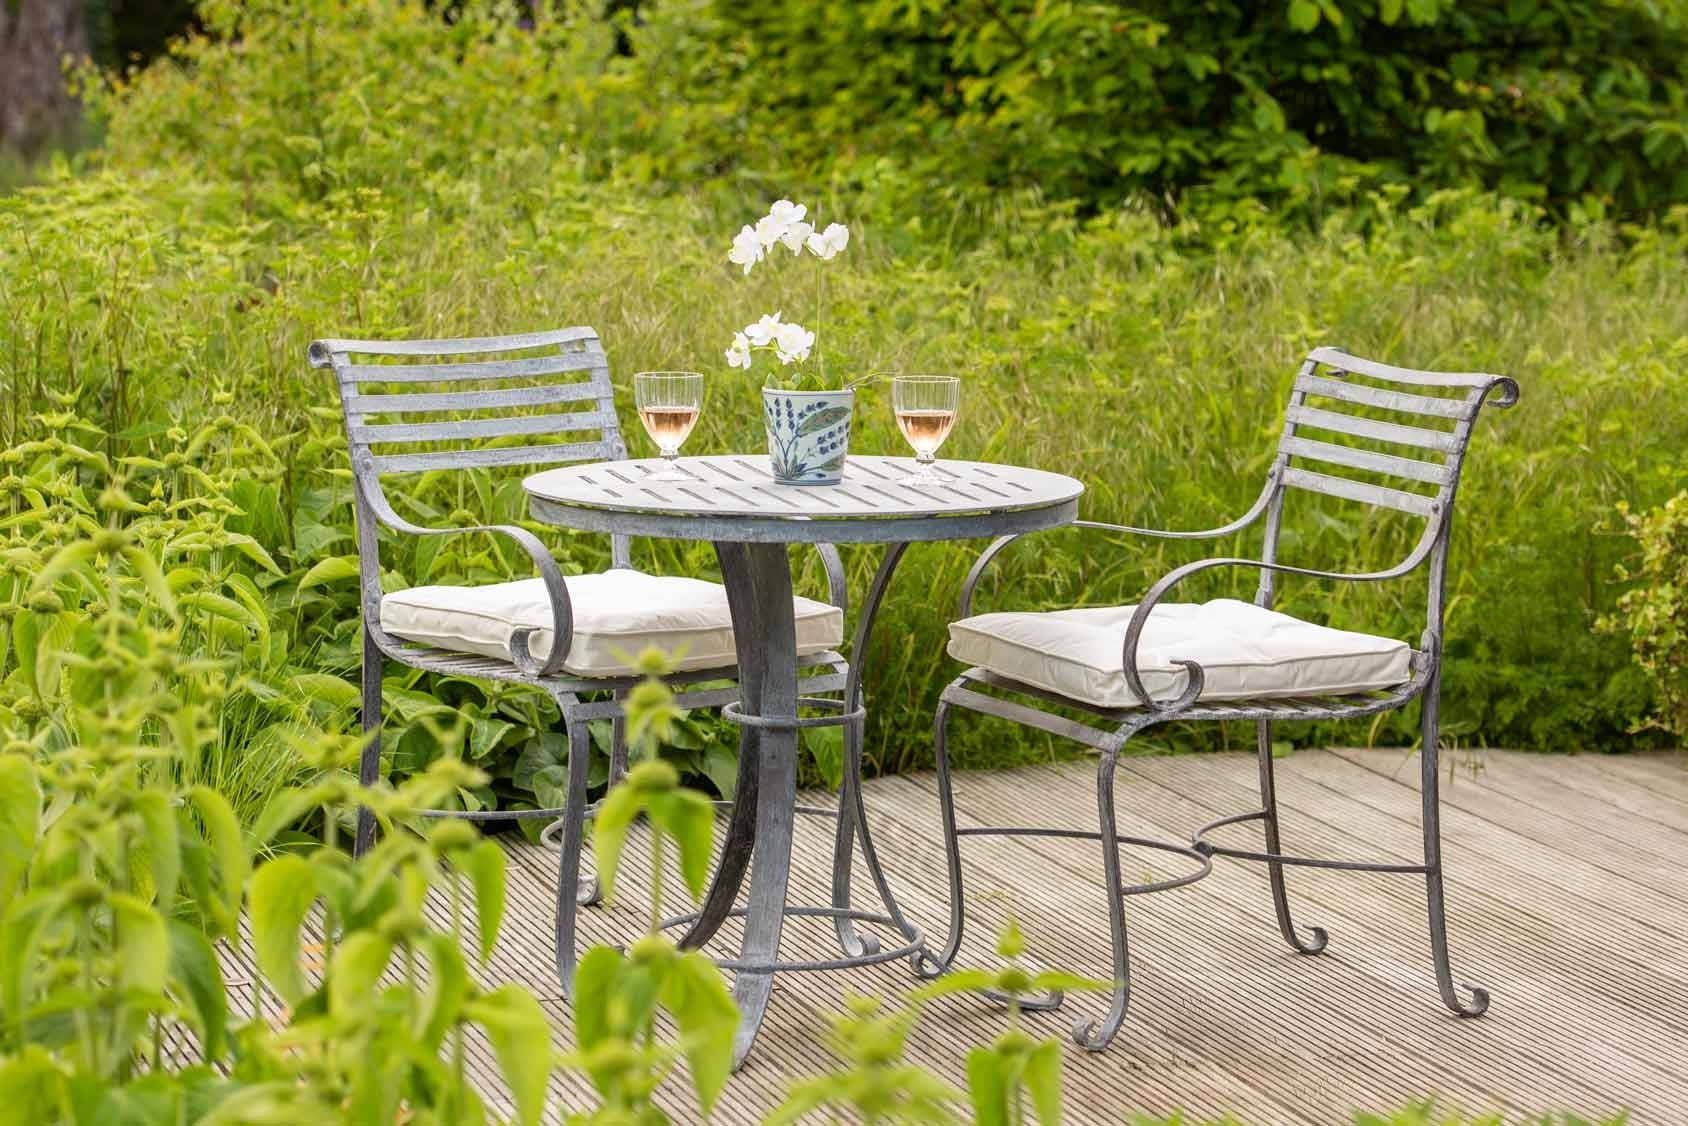 Handcrafted Traditional Metal Garden Bistro Set - 2 Seater - The Southwold Collection by Harrod Horticultural